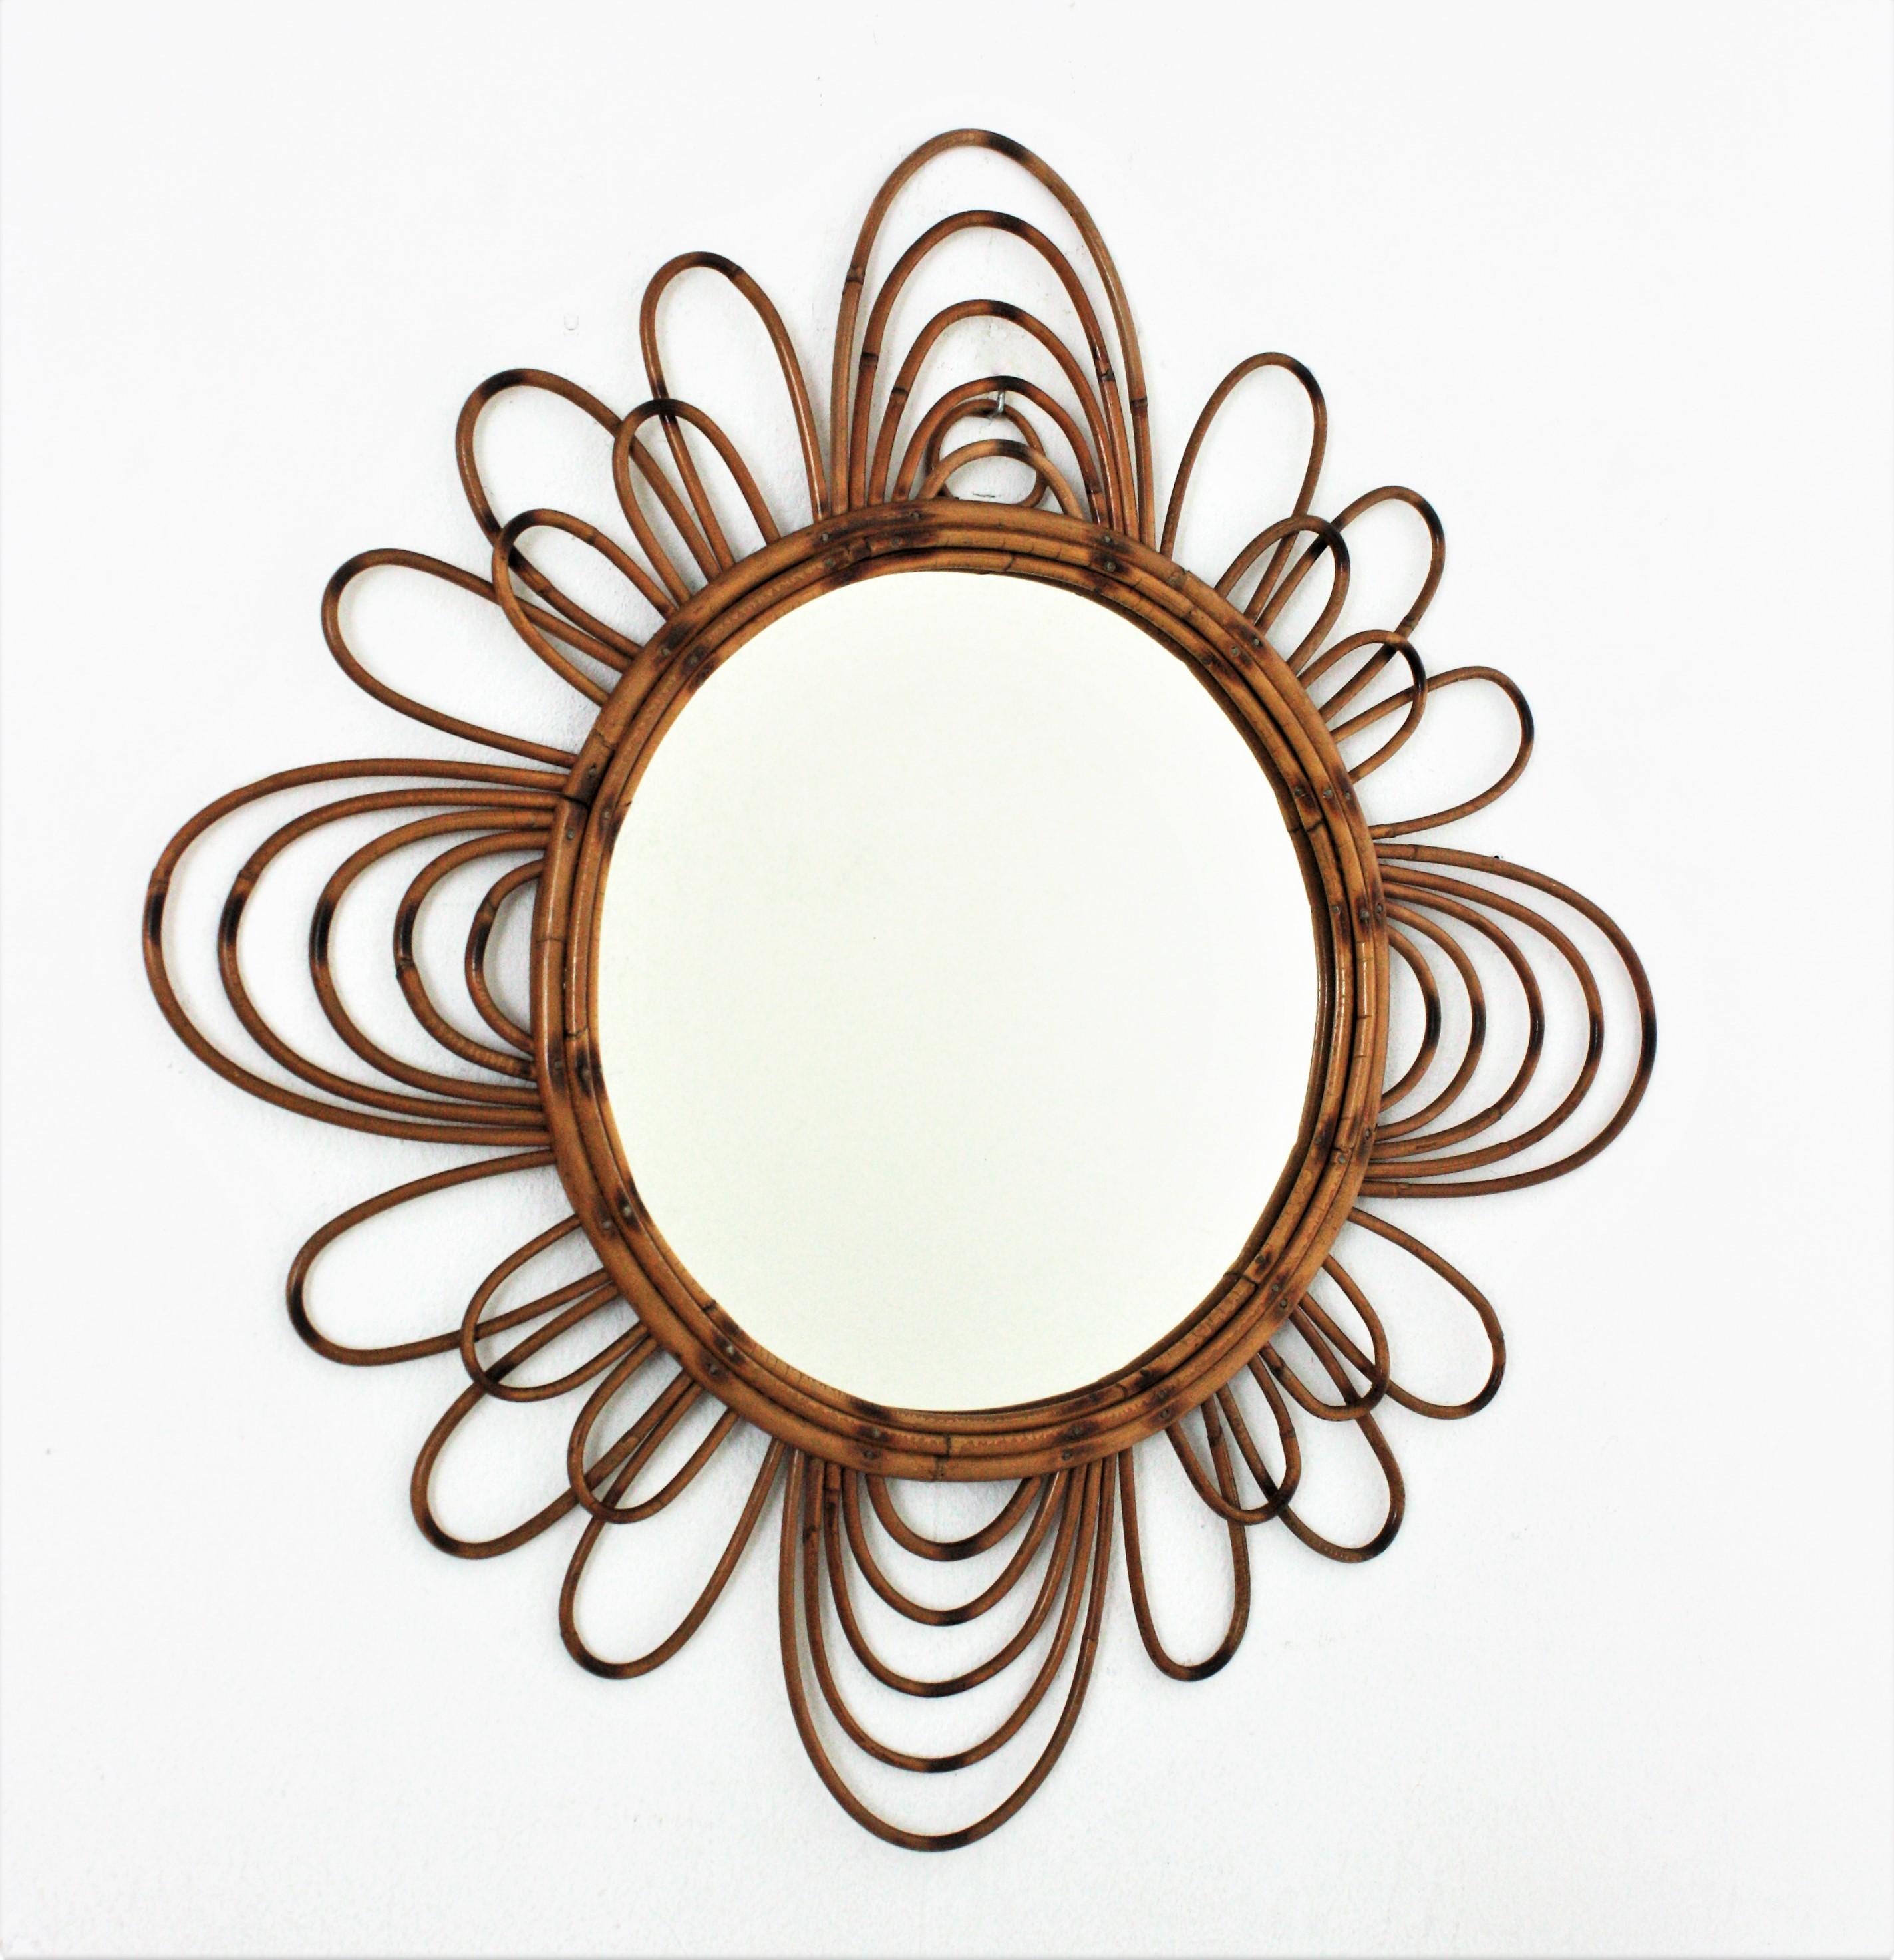 Flower Sunburst mirror in rattan, France, 1950-1960.
A cool Mid-Century Modern handcrafted rattan mirror with flower shape and all the taste of the Mediterranean French Riviera style.
Place it alone or as a part of a wall composition with other